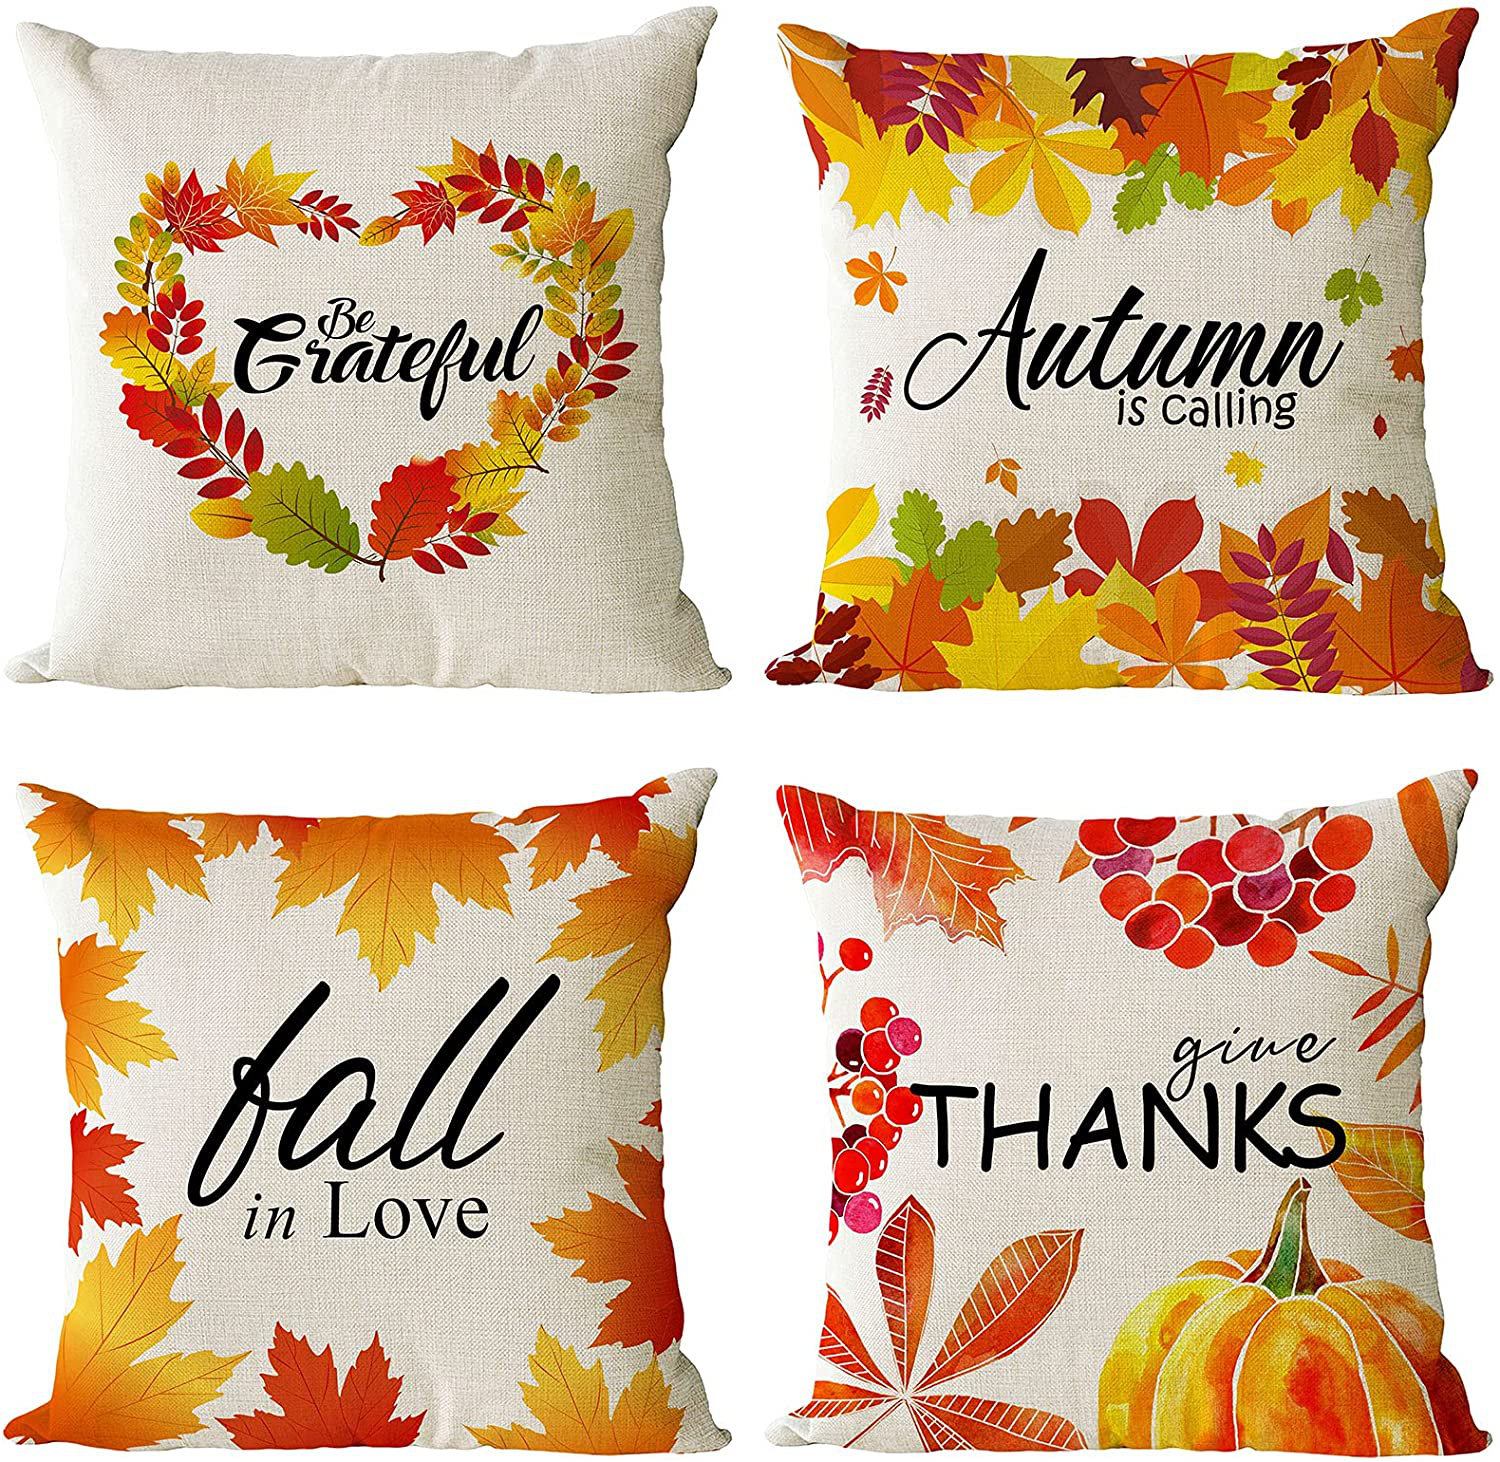 18 by 18 Set of 4 Fall Pillow Covers 18x18 Inch Fall Thanksgiving Pumpkins Decor Throw Pillows Covers Autumn Leaves Decorative Home Outdoor Sofa Couch Pillow Cases for Fall Theme Decorations 